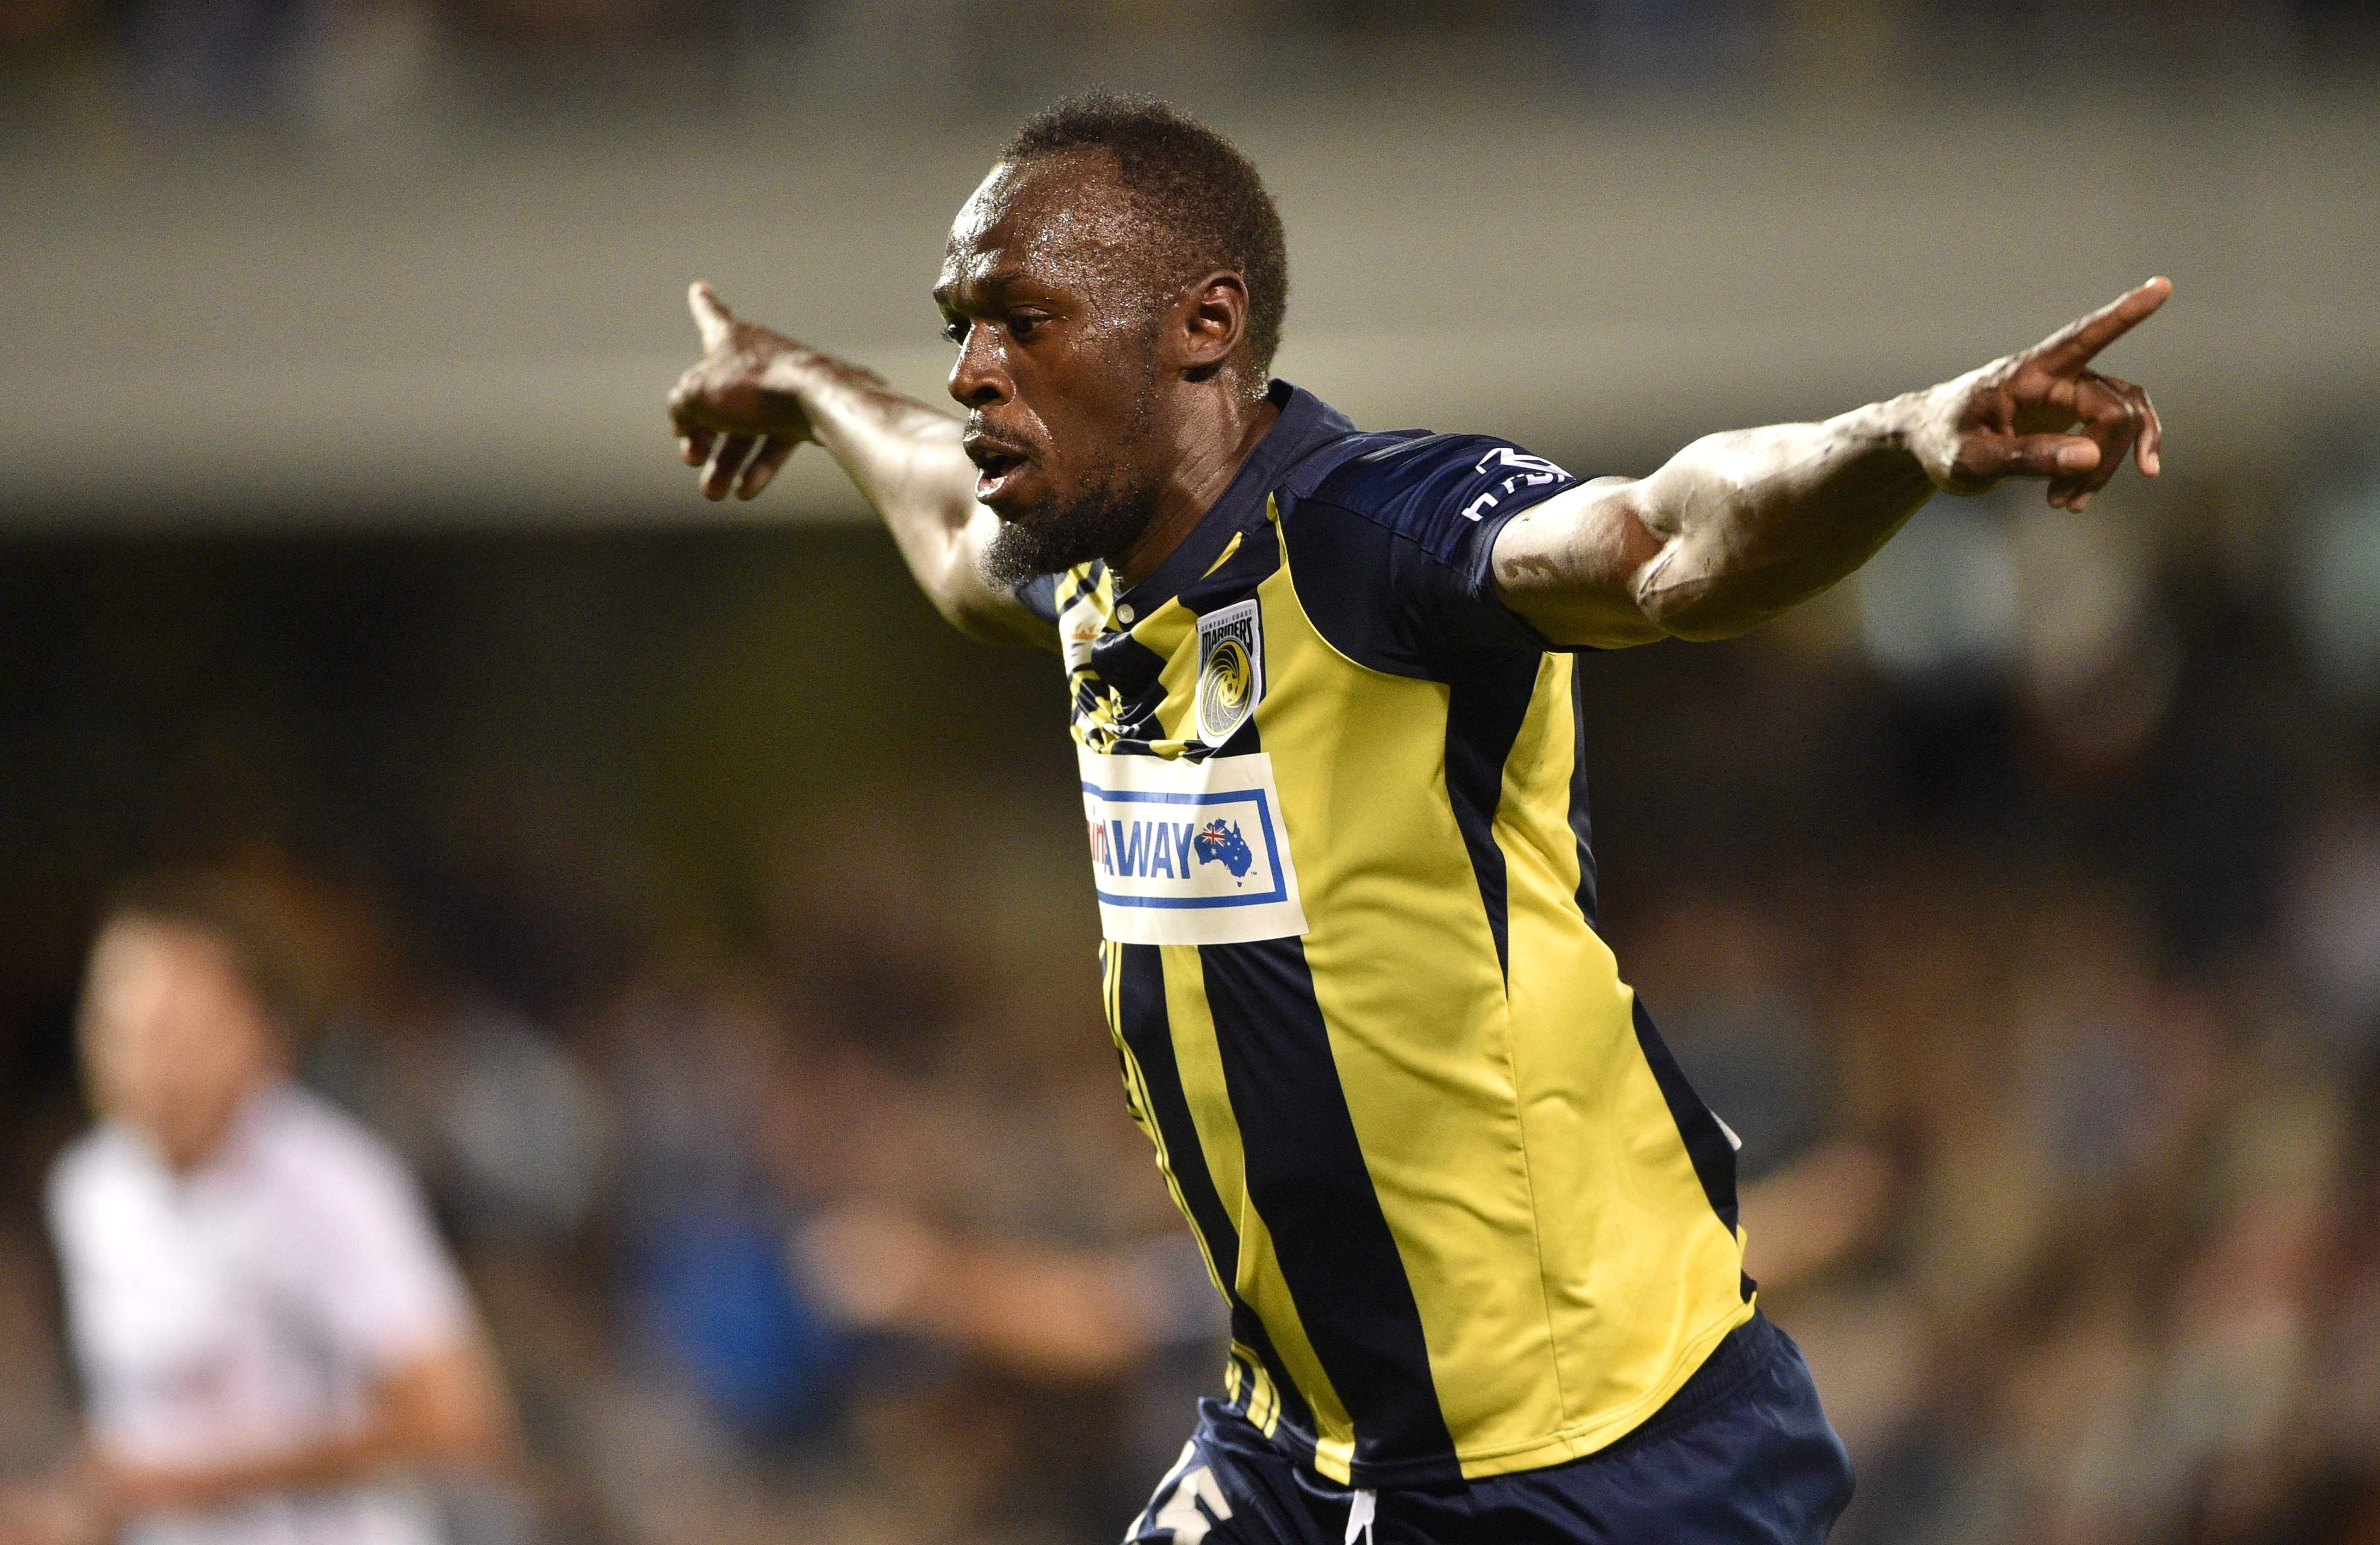 Usain Bolt celebrates scoring for A-League club Central Coast Mariners in his first competitive start against Macarthur South West United in Sydney. Photo: AFP